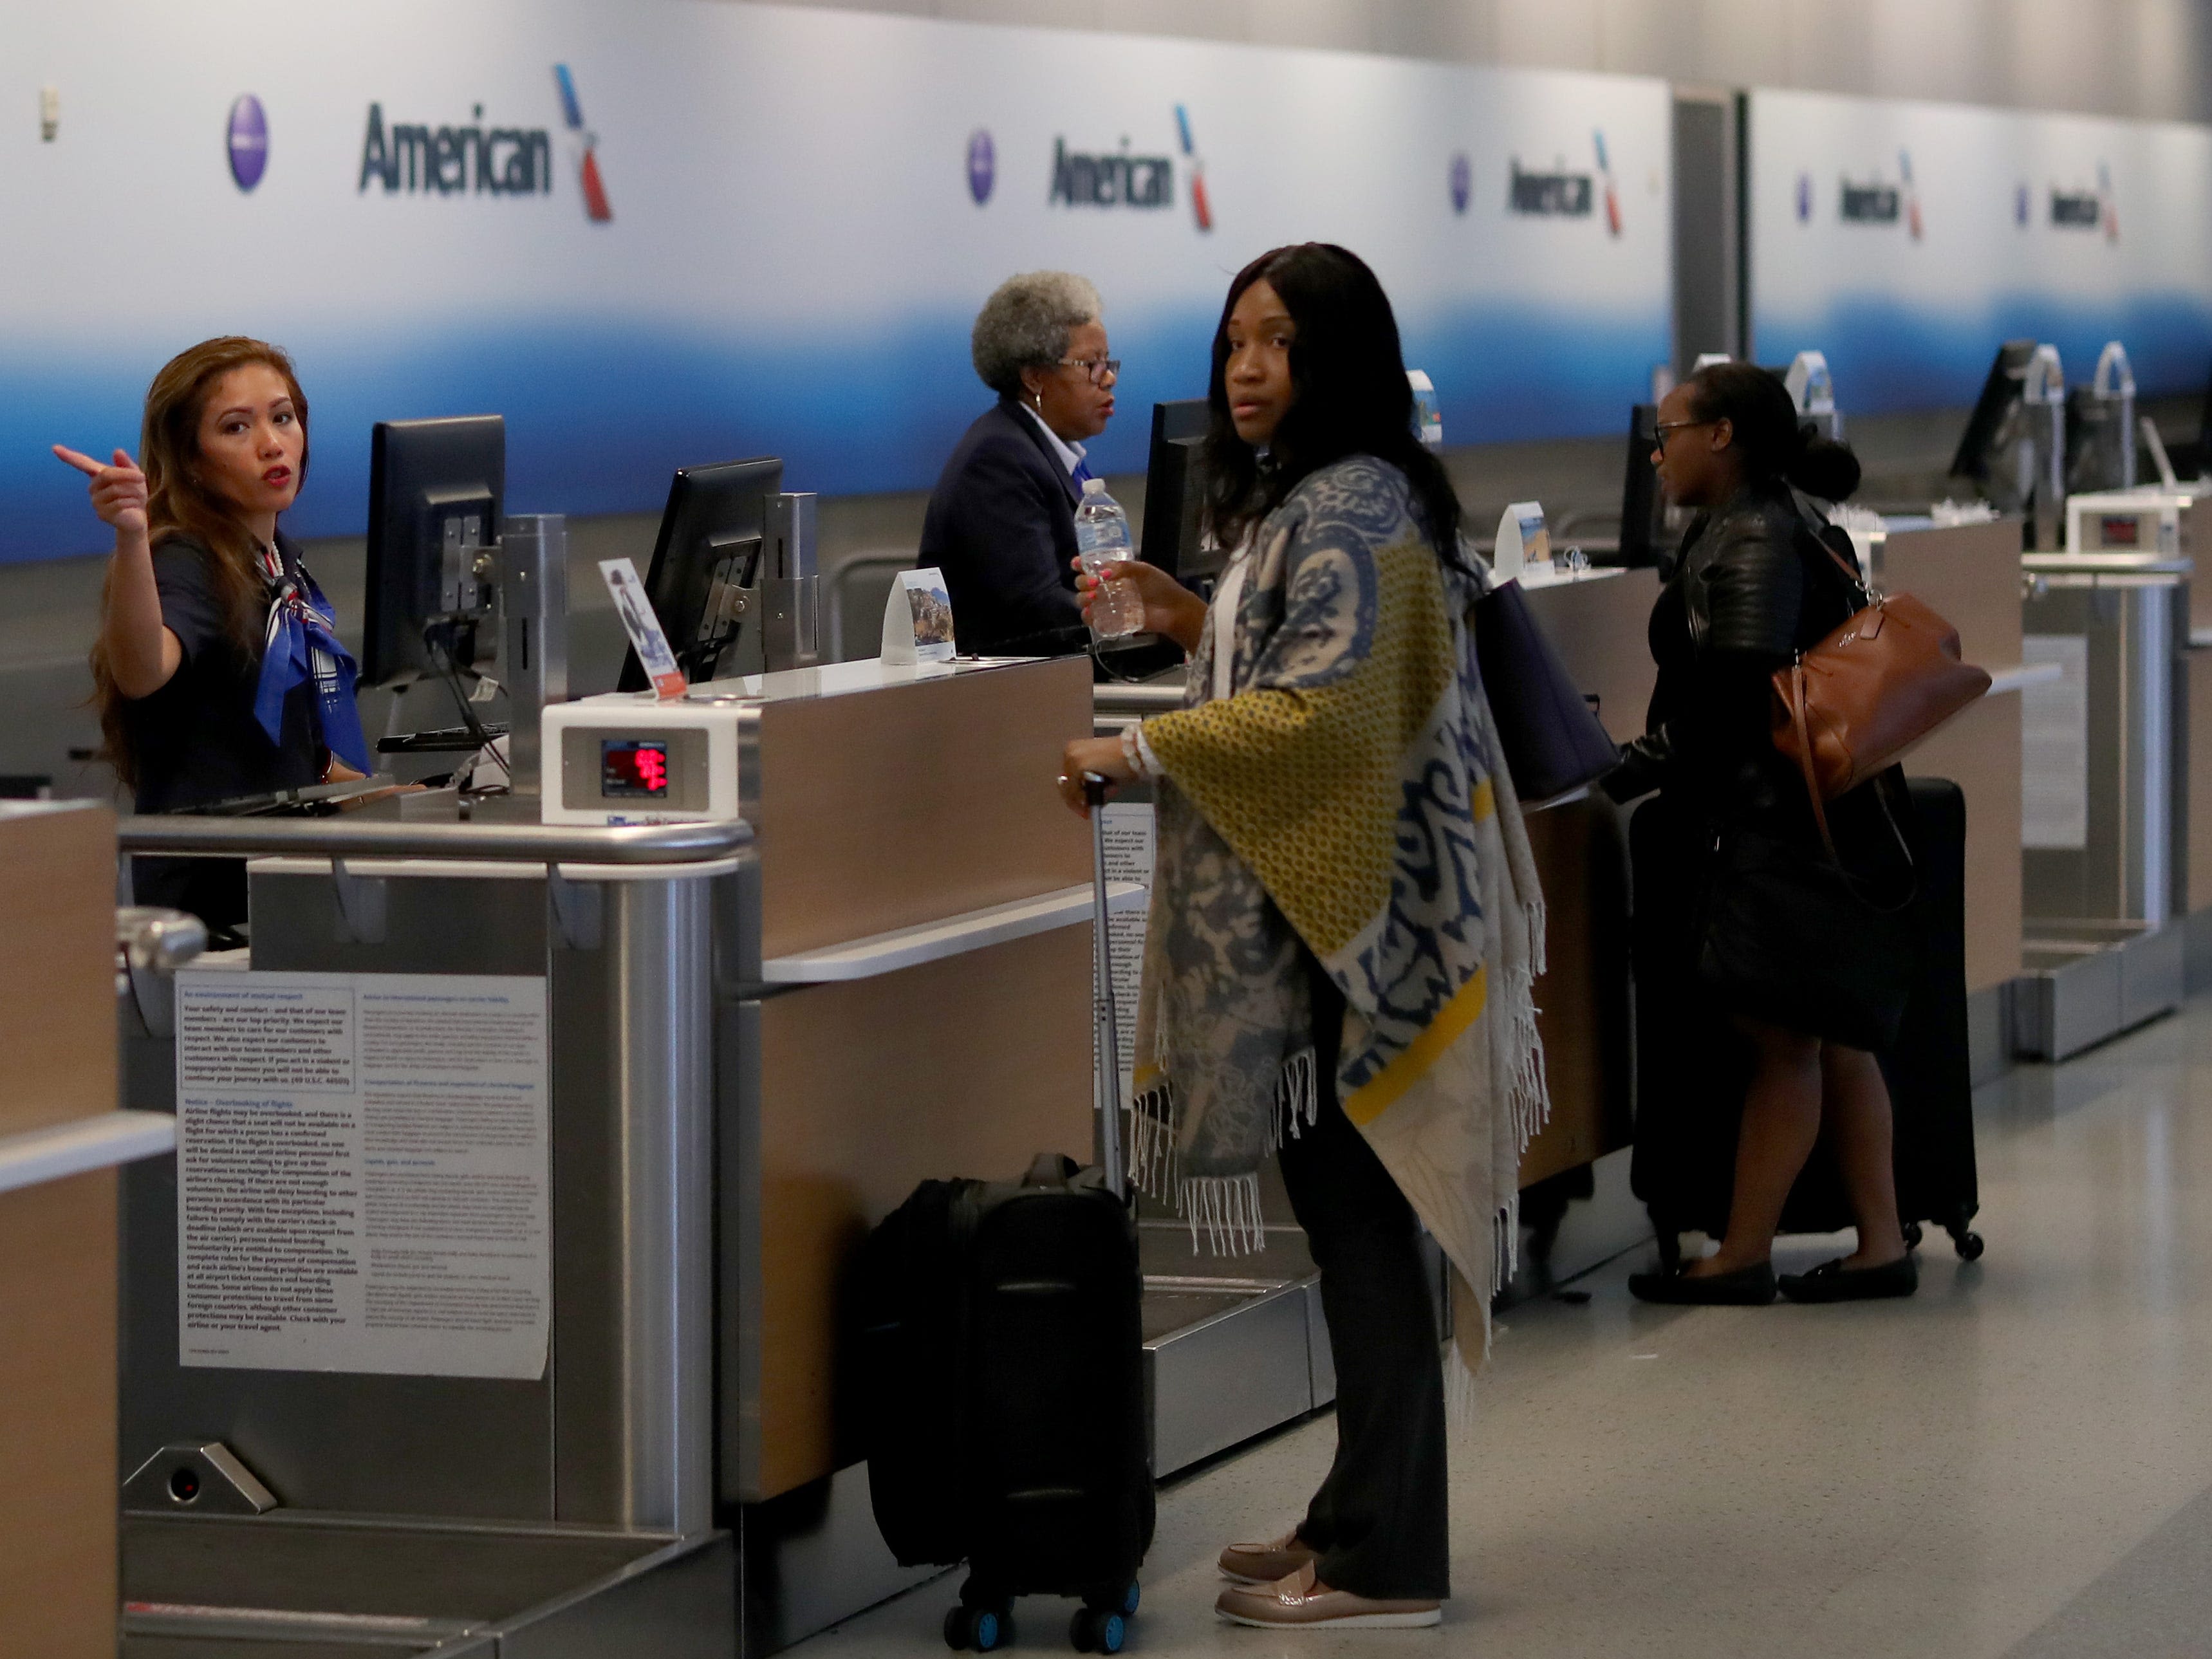 American Airlines CEO admits the airline messed up its plan to disrupt how tickets are sold